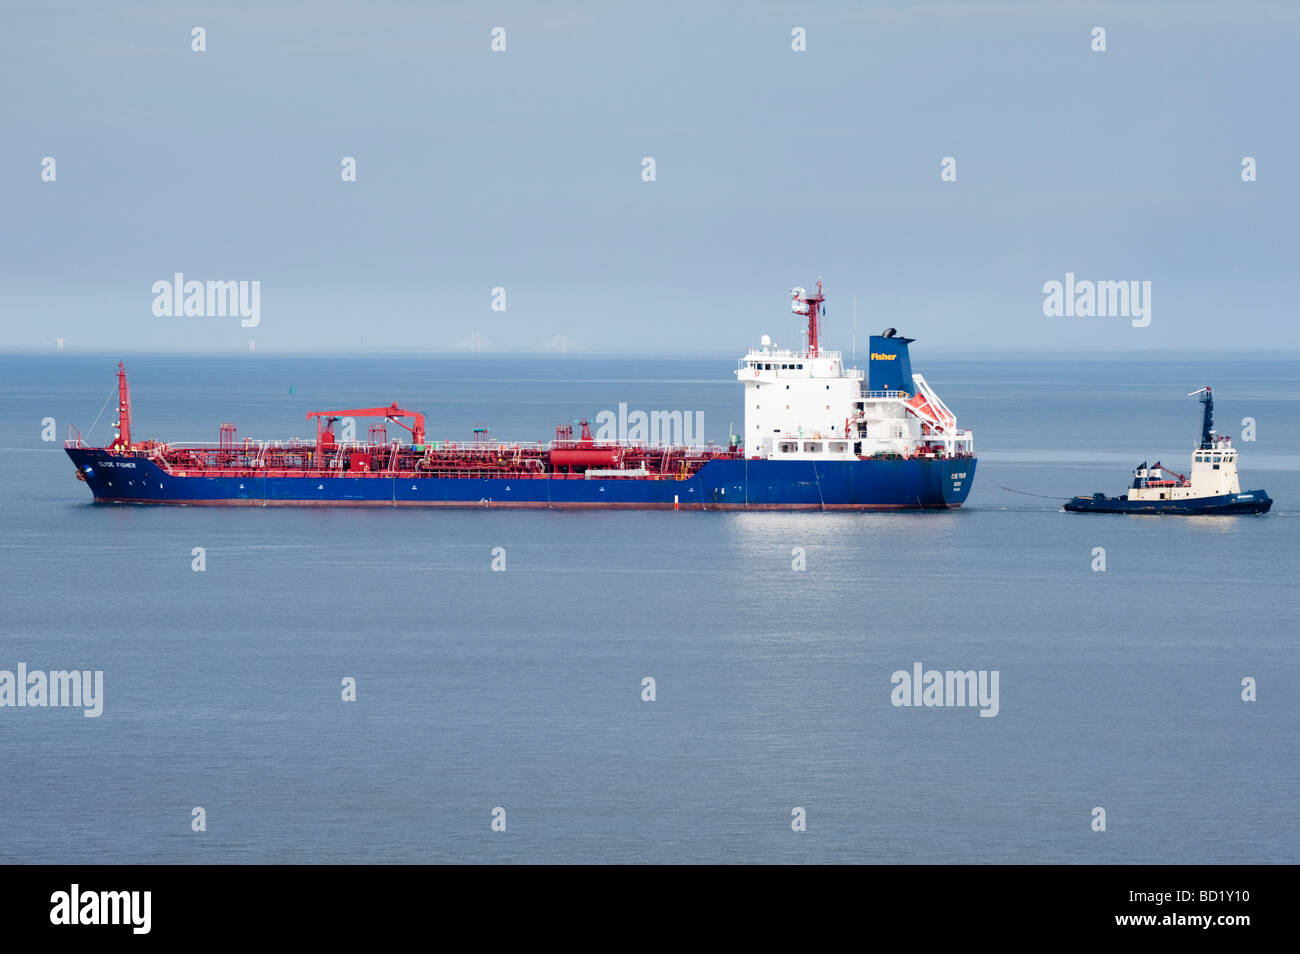 Tanker, Clyde Fisher, passing Penarth Head, bound for Cardiff.  The new and old Severn Bridges are visible in the background. Stock Photo